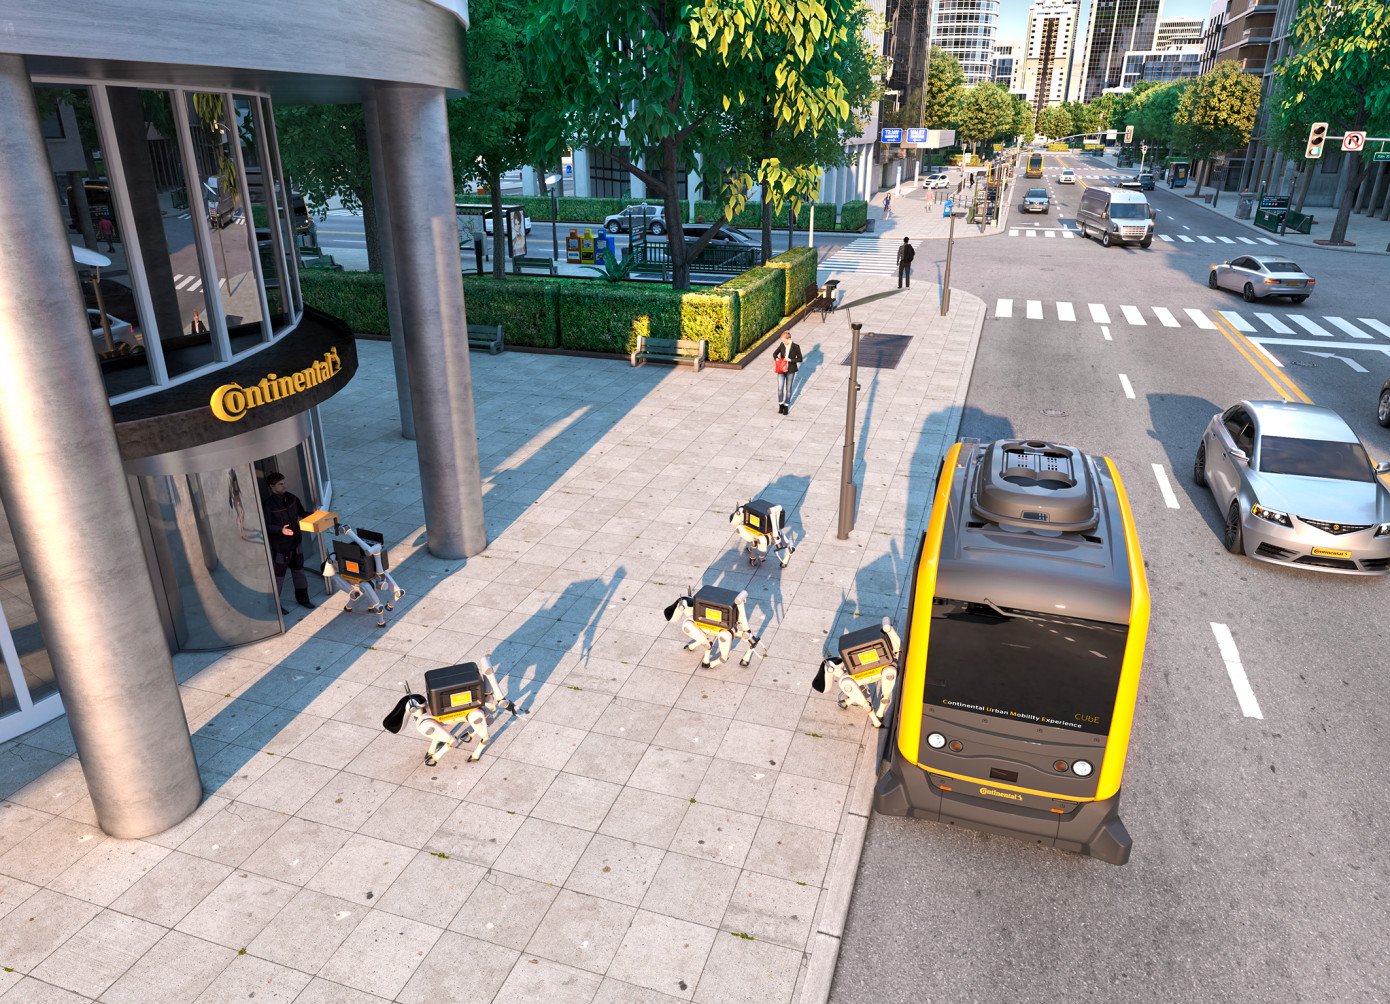 Continental offers to deliver goods using drones and robots-dogs